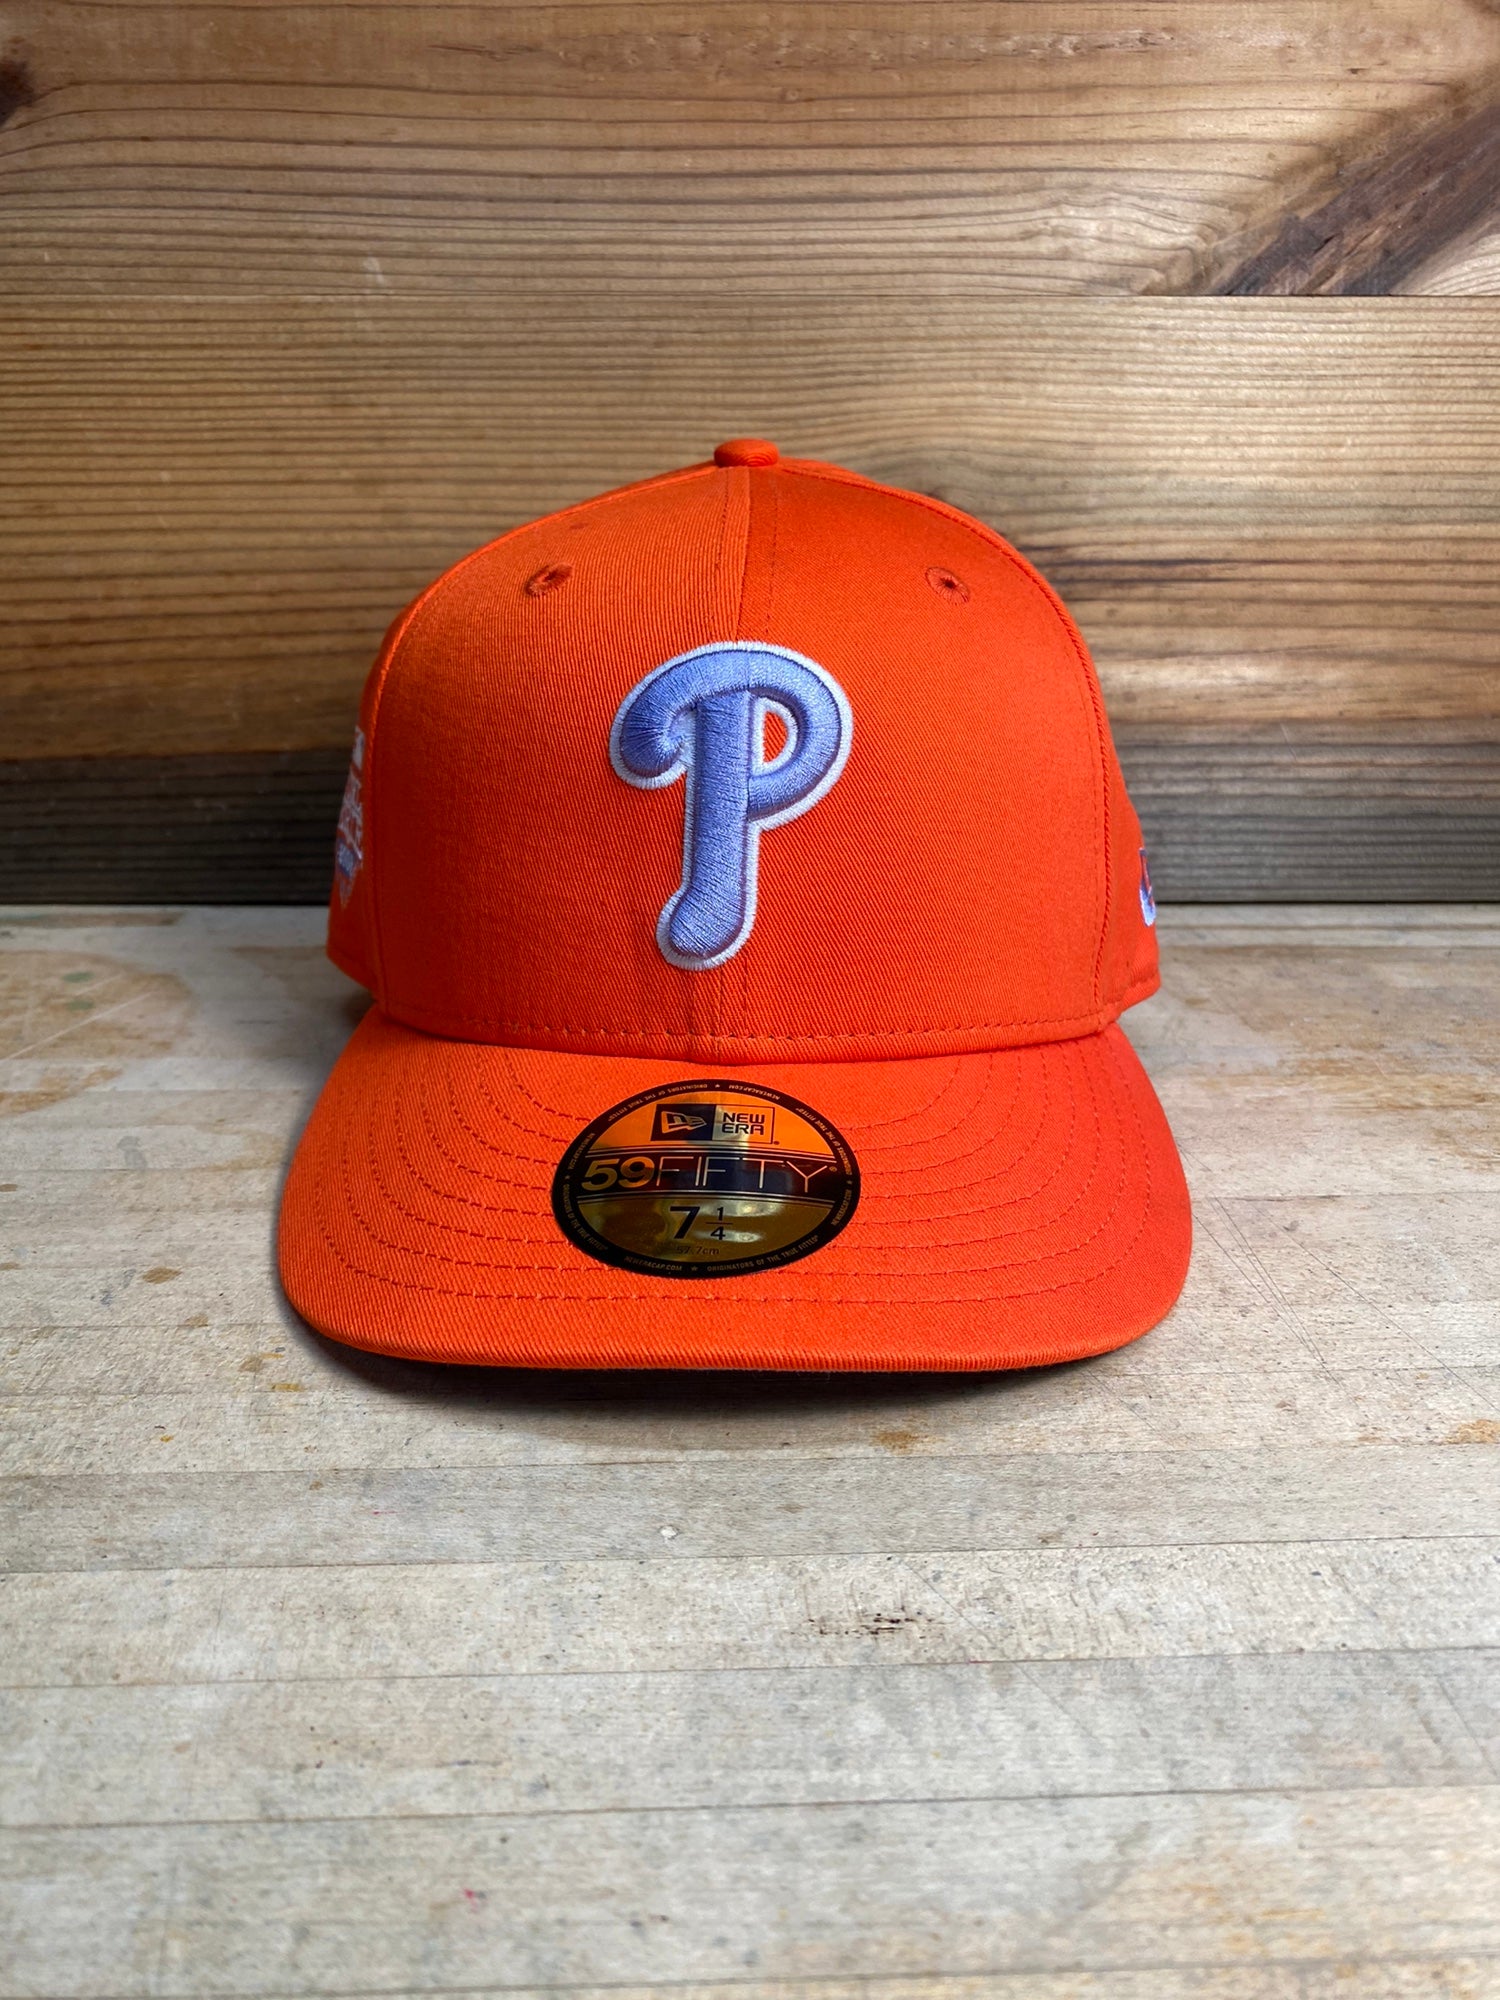 New Era Mens MLB Philadelphia Phillies World Series Champions 59FIFTY Fitted Hat 60224553 Red 7 1/4